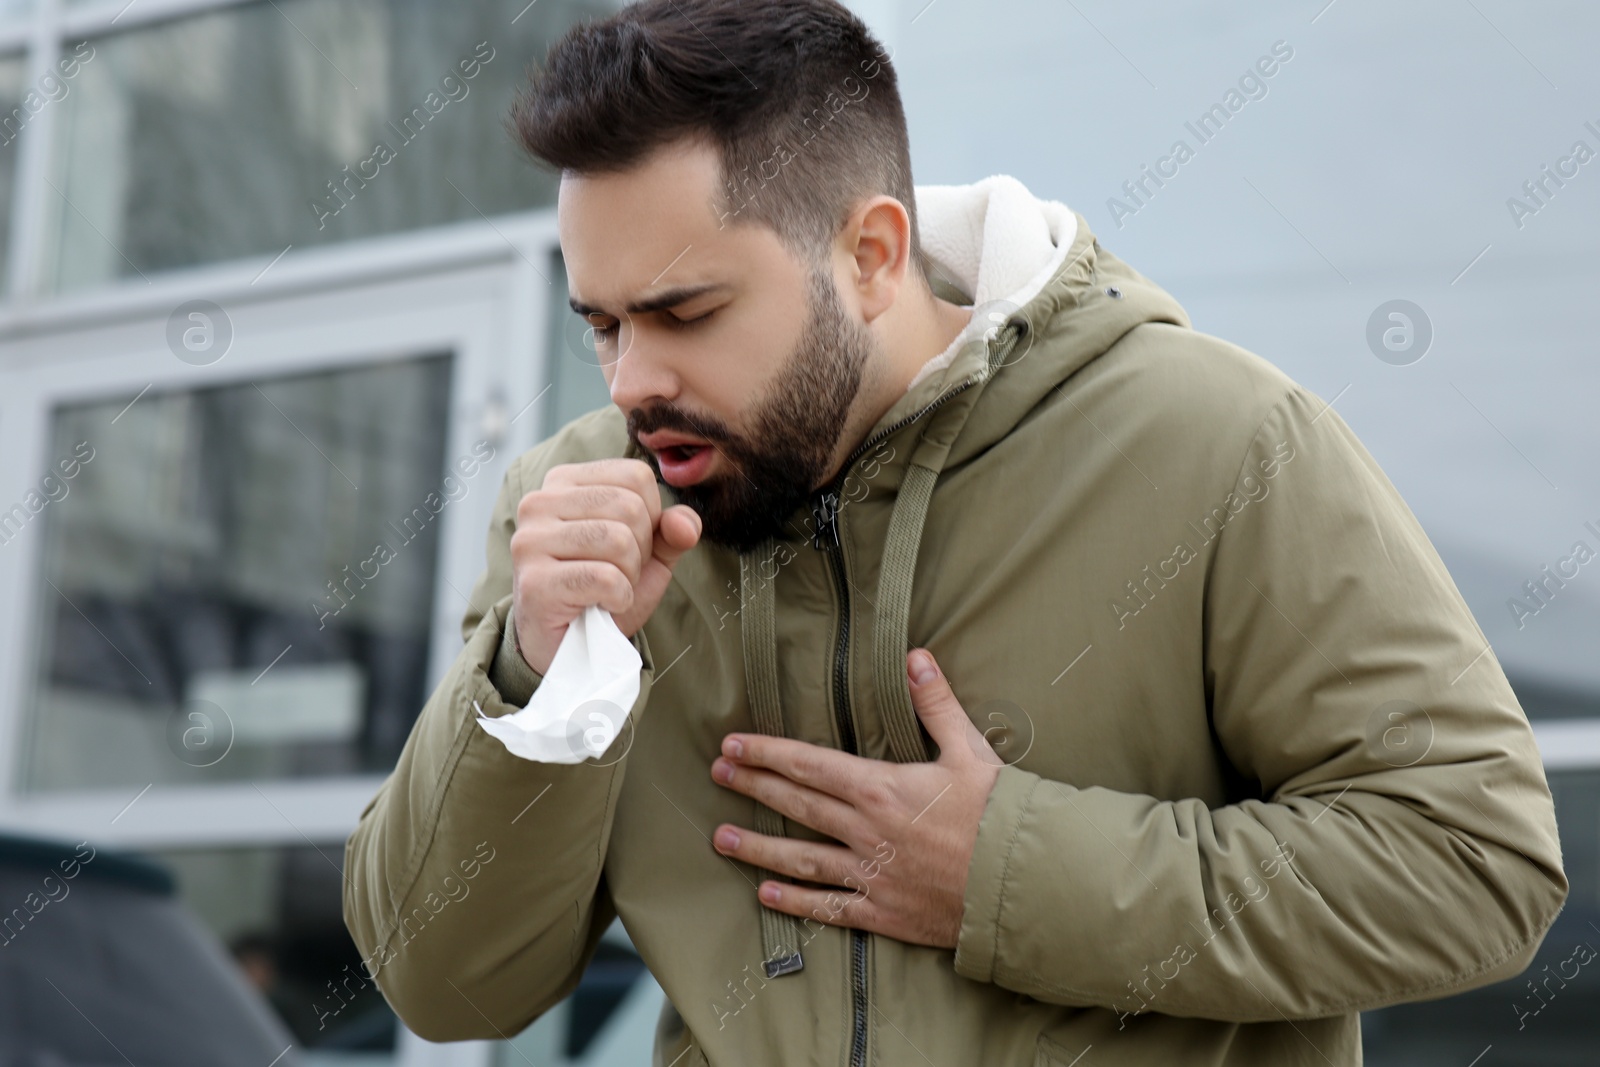 Photo of Sick man with tissue coughing outdoors. Cold symptoms